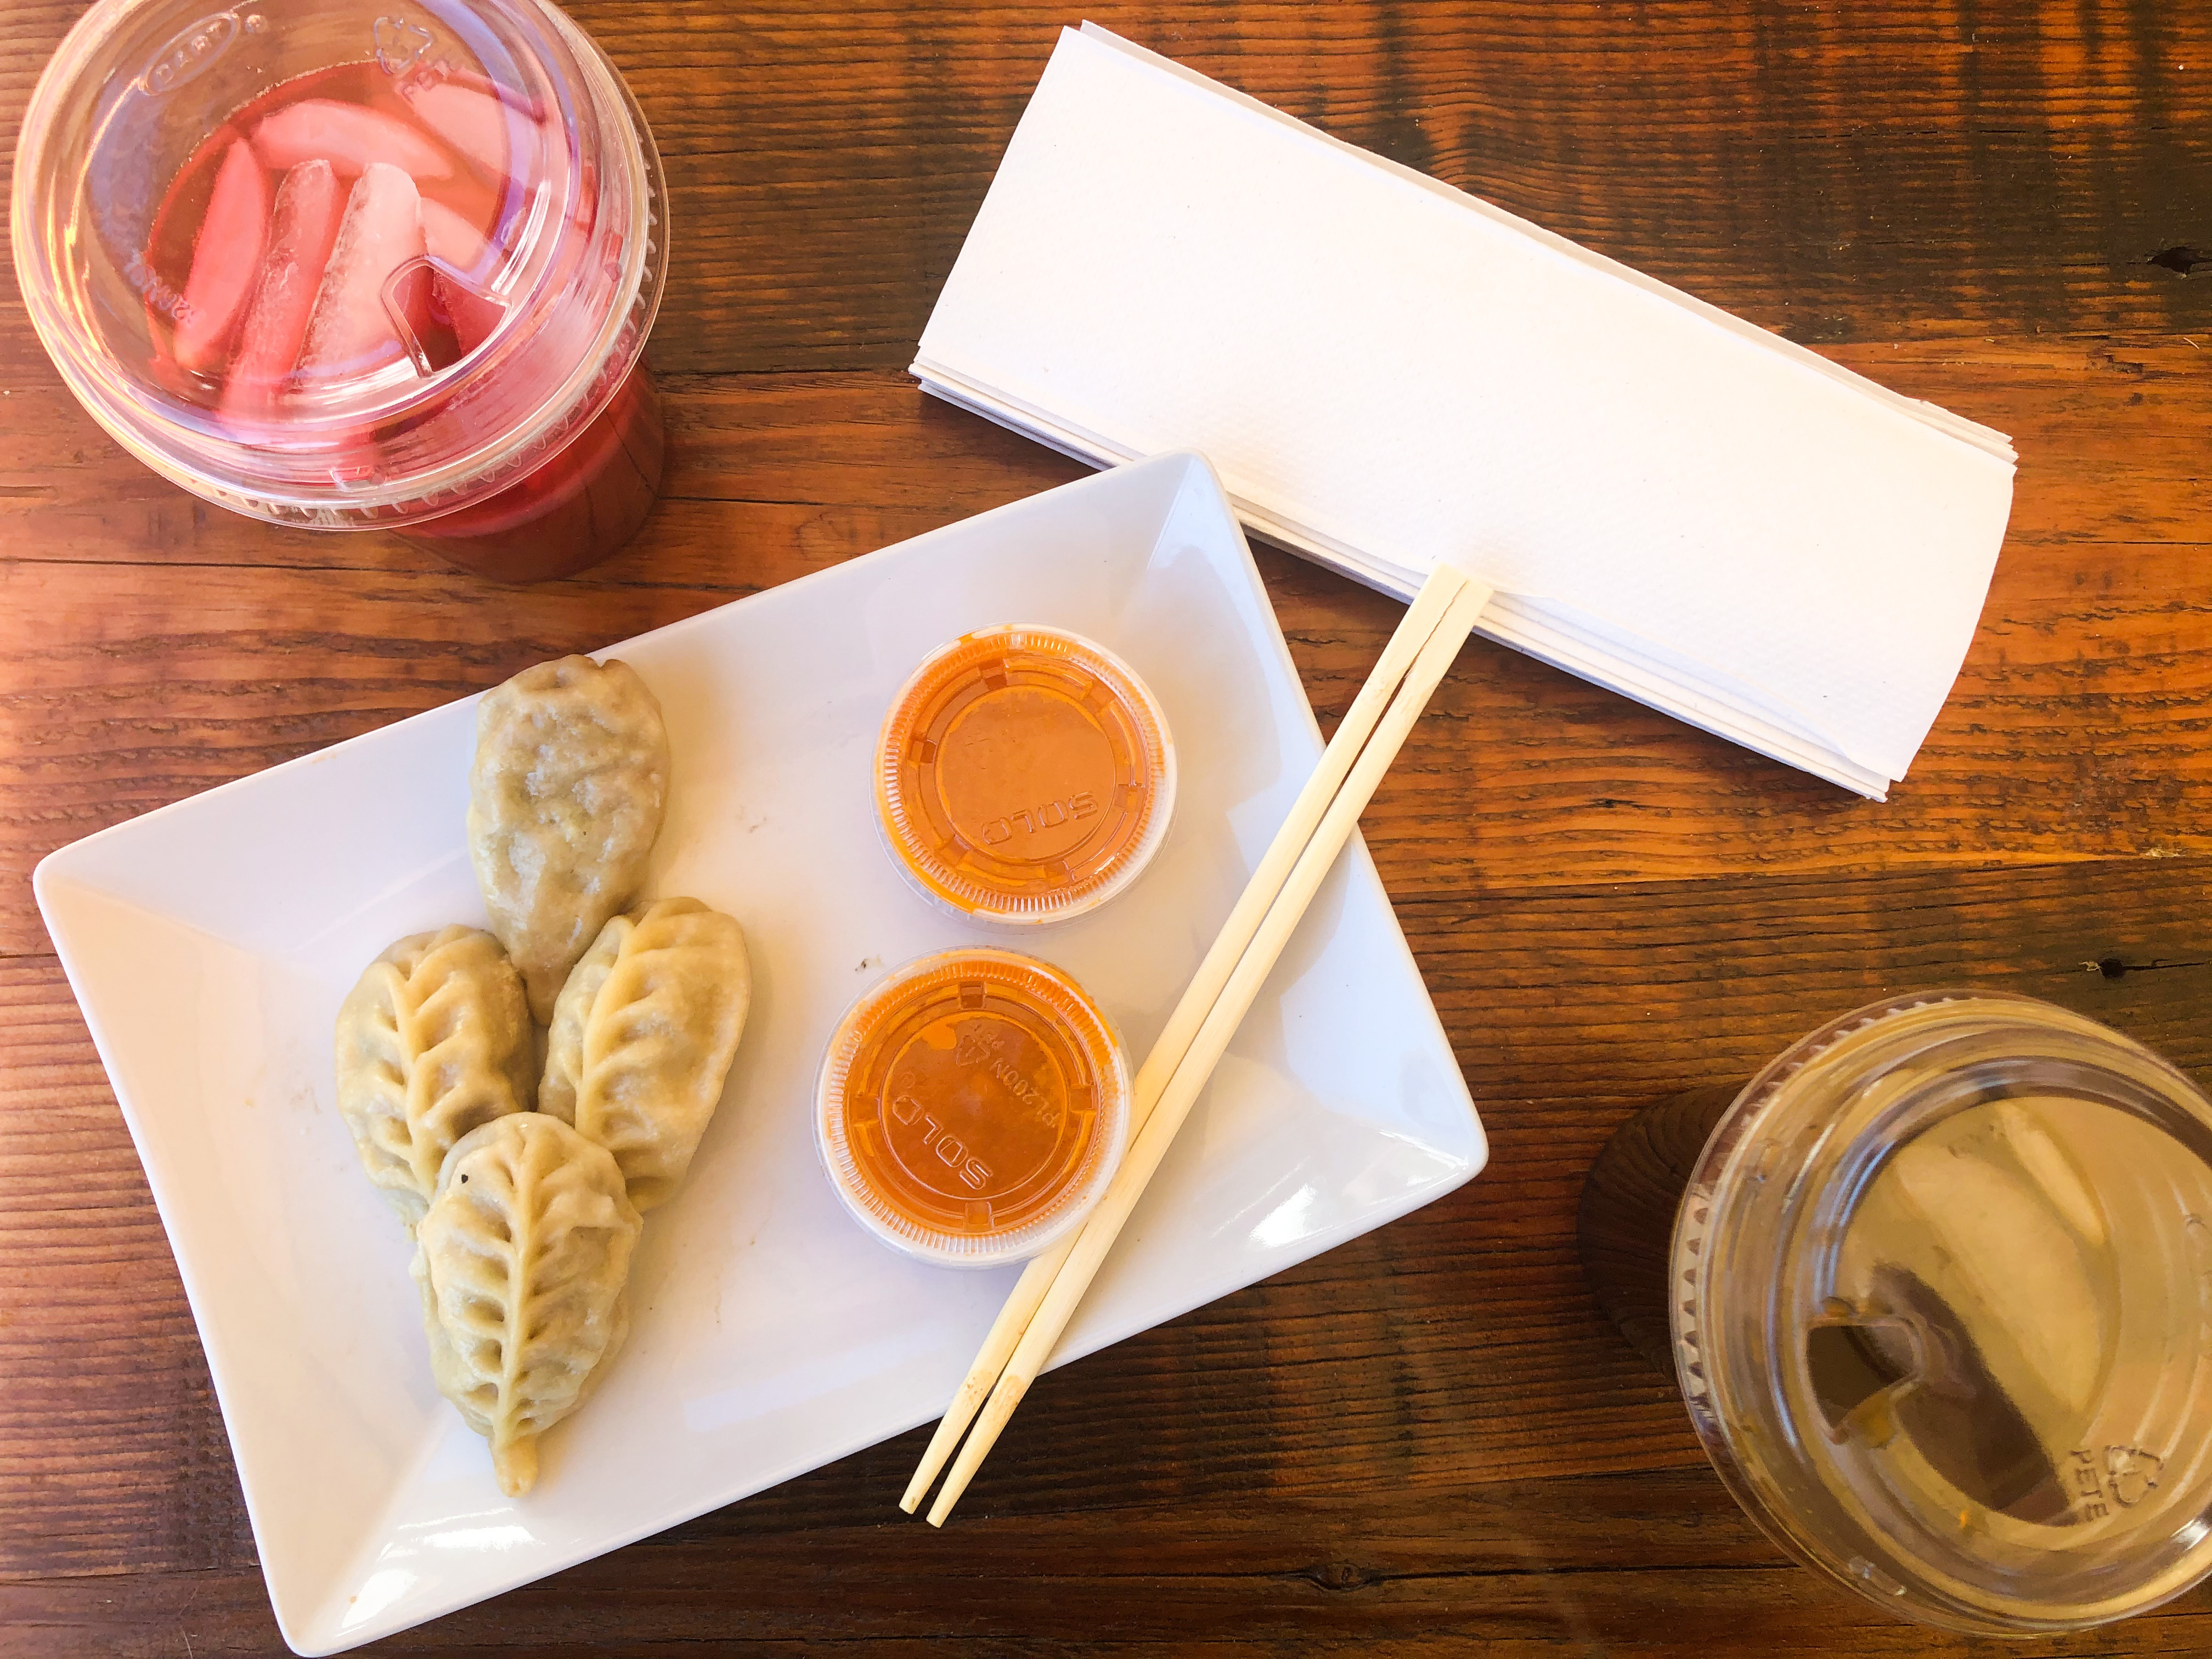 A table with four dumplings on a plate next to two containers of tomato chutney, placed next to hibiscus drinks and Kenyan lemonade